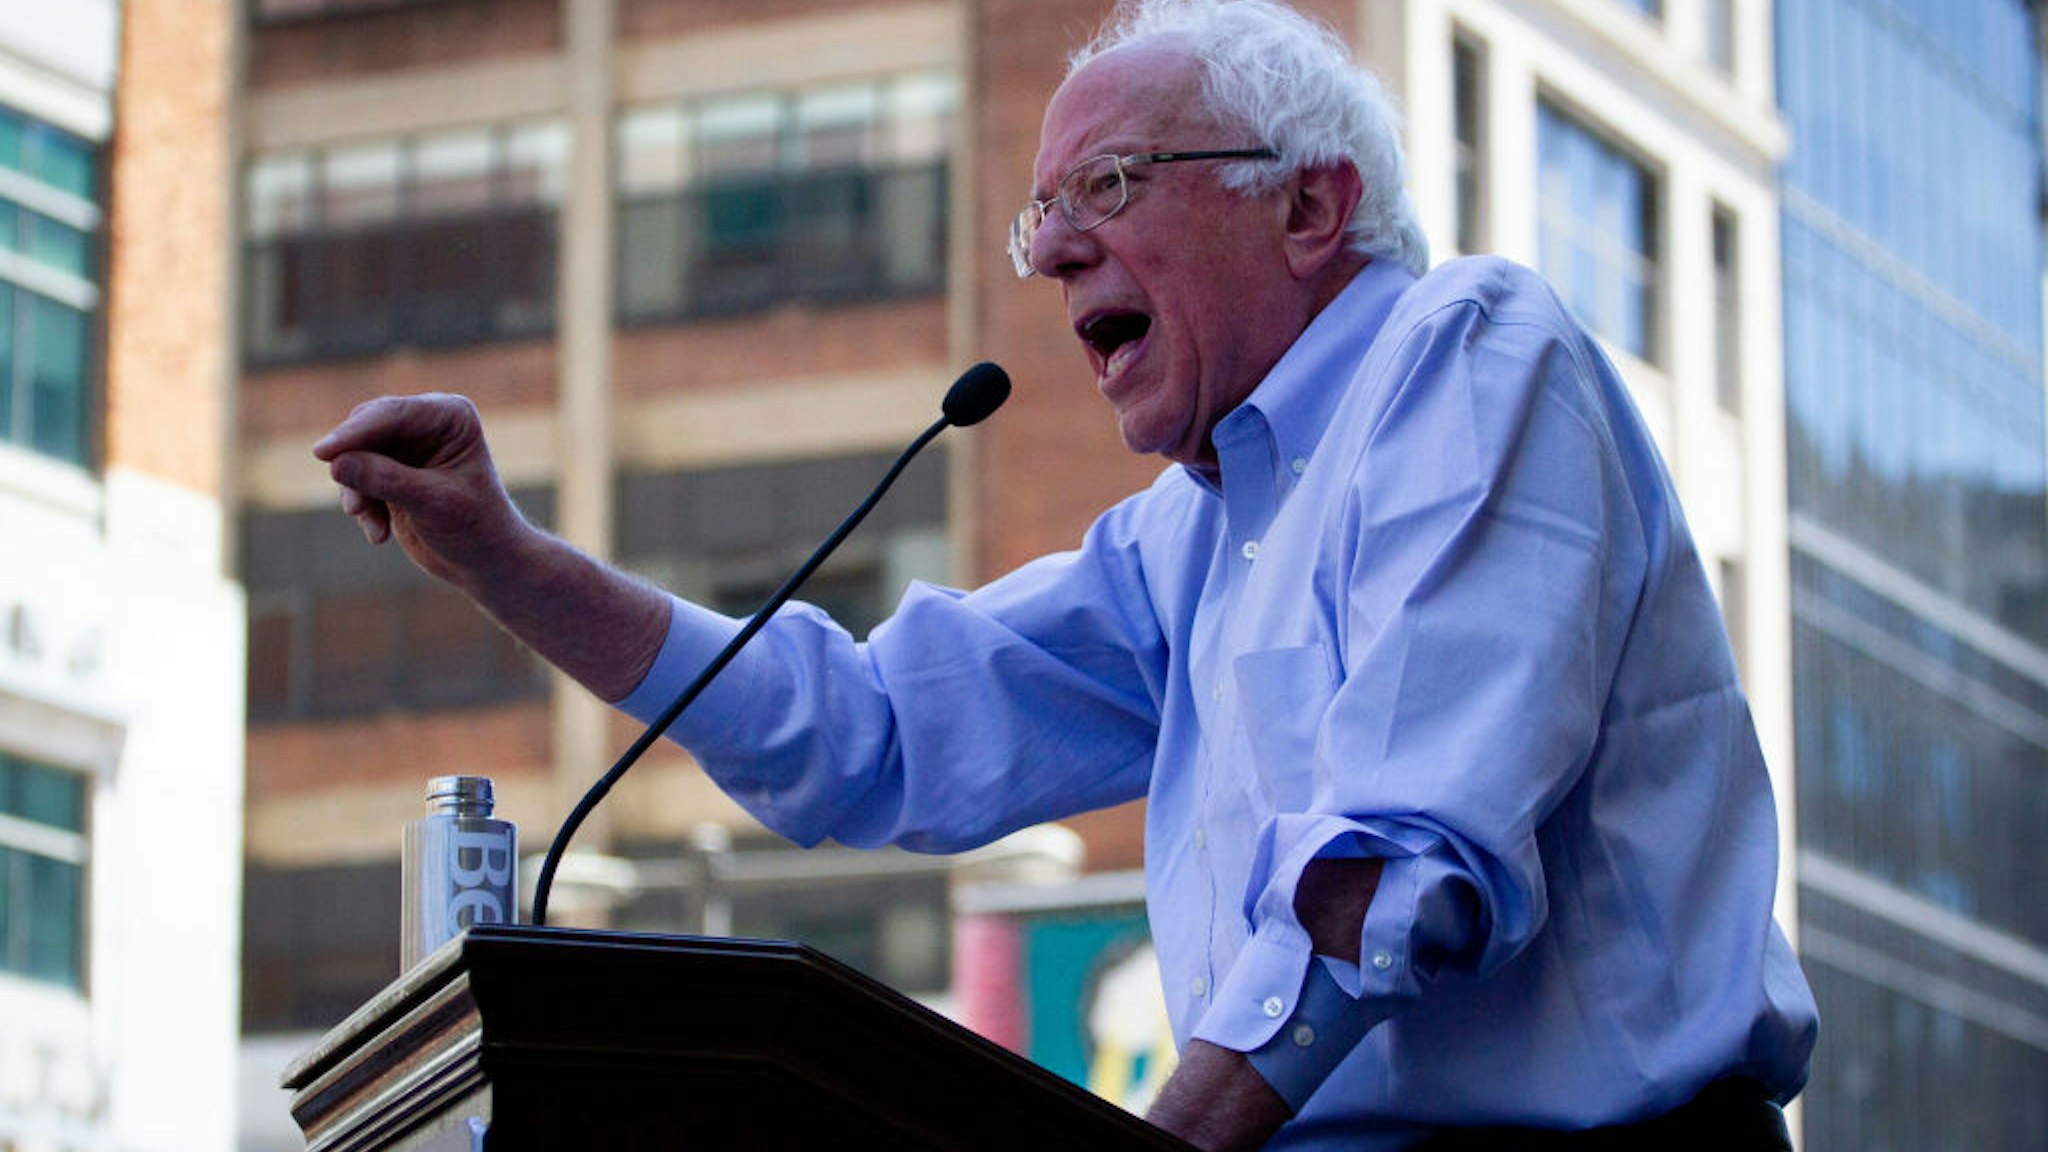 Senator Bernie Sanders addresses the crowd at a rally gathered to protest the closure of Hahnemann University Hospital in Philadelphia, PA, July 15, 2019.